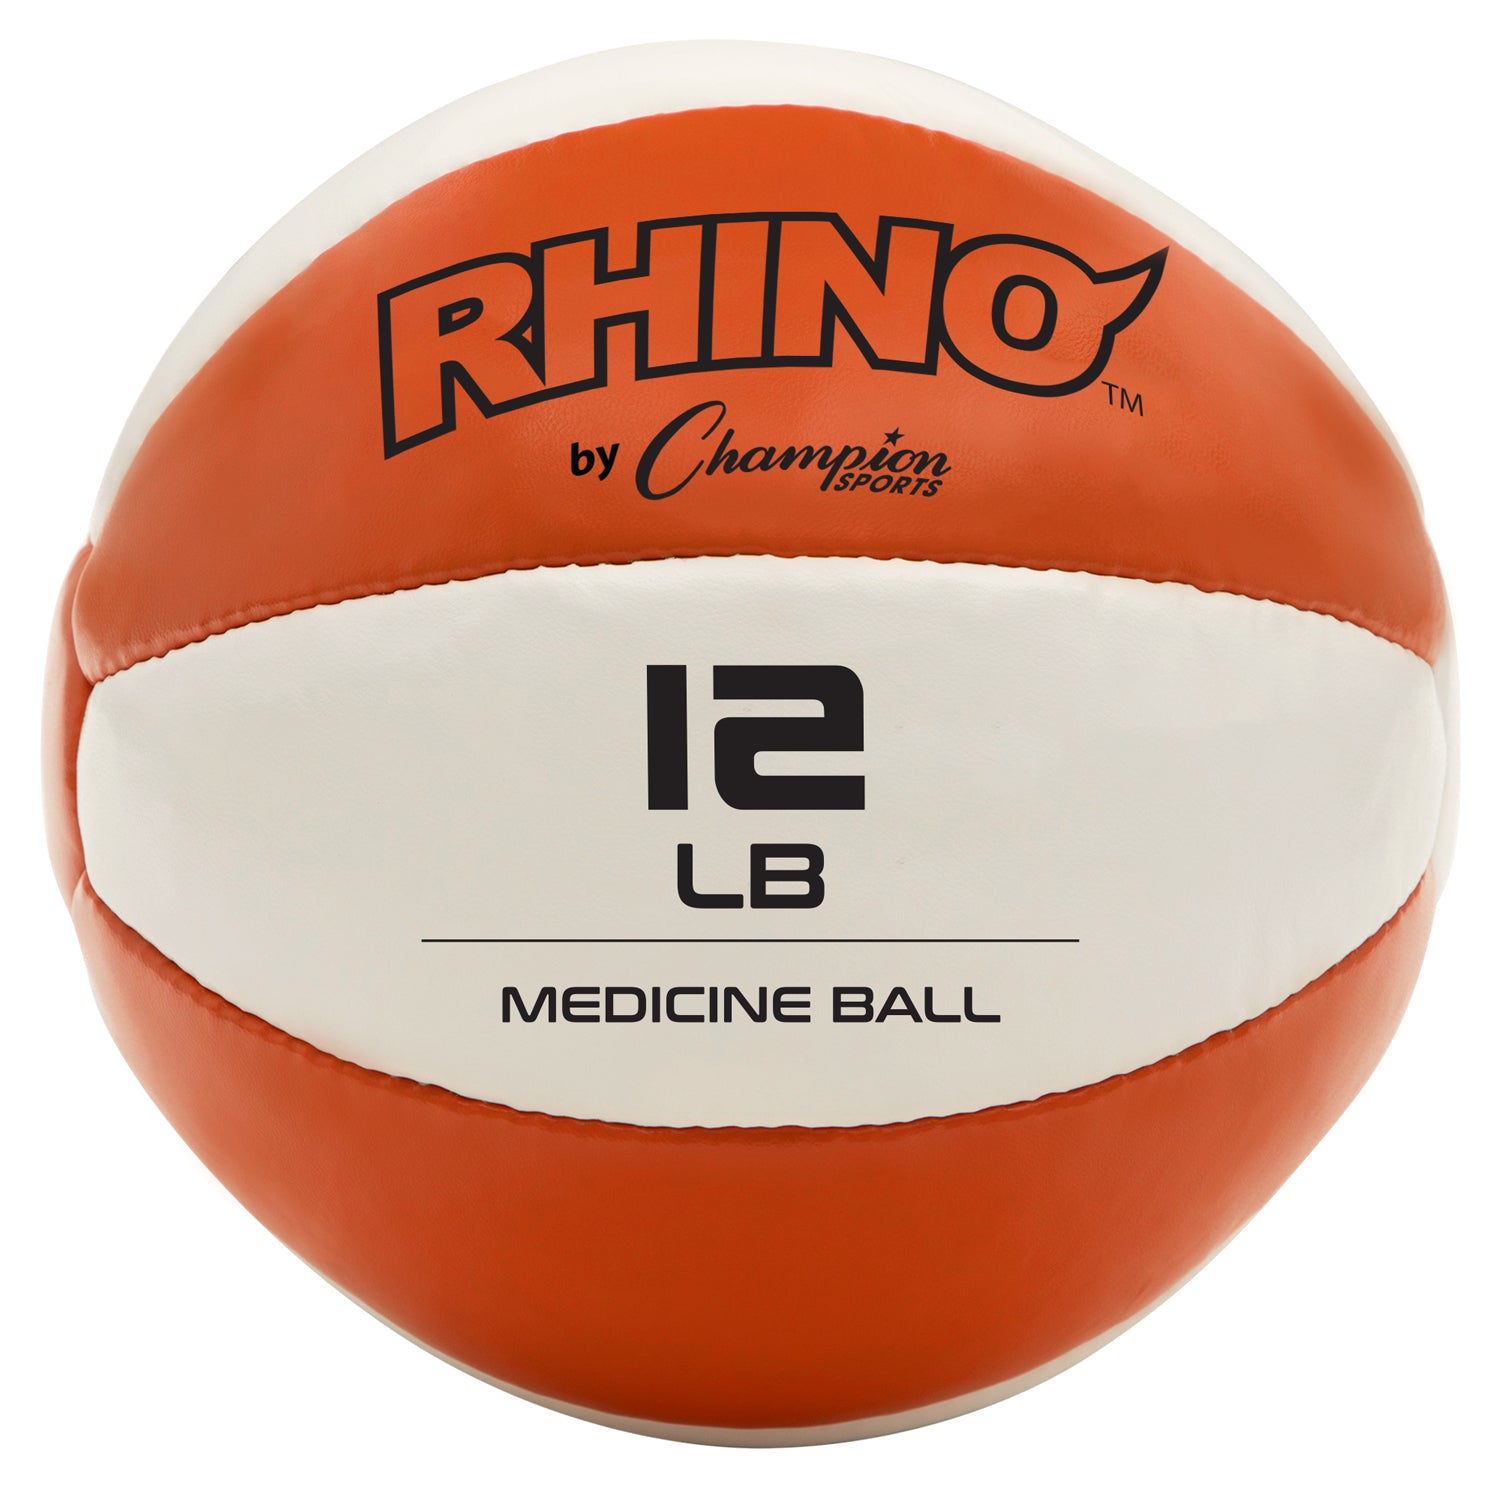 RHINO Fitness® Leather Medicine Ball Series 11-12 lb, 5 kg, 7.98"D, Orange RHINO Fitness __label:NEW! fitness indoor medicine ball physical therapy